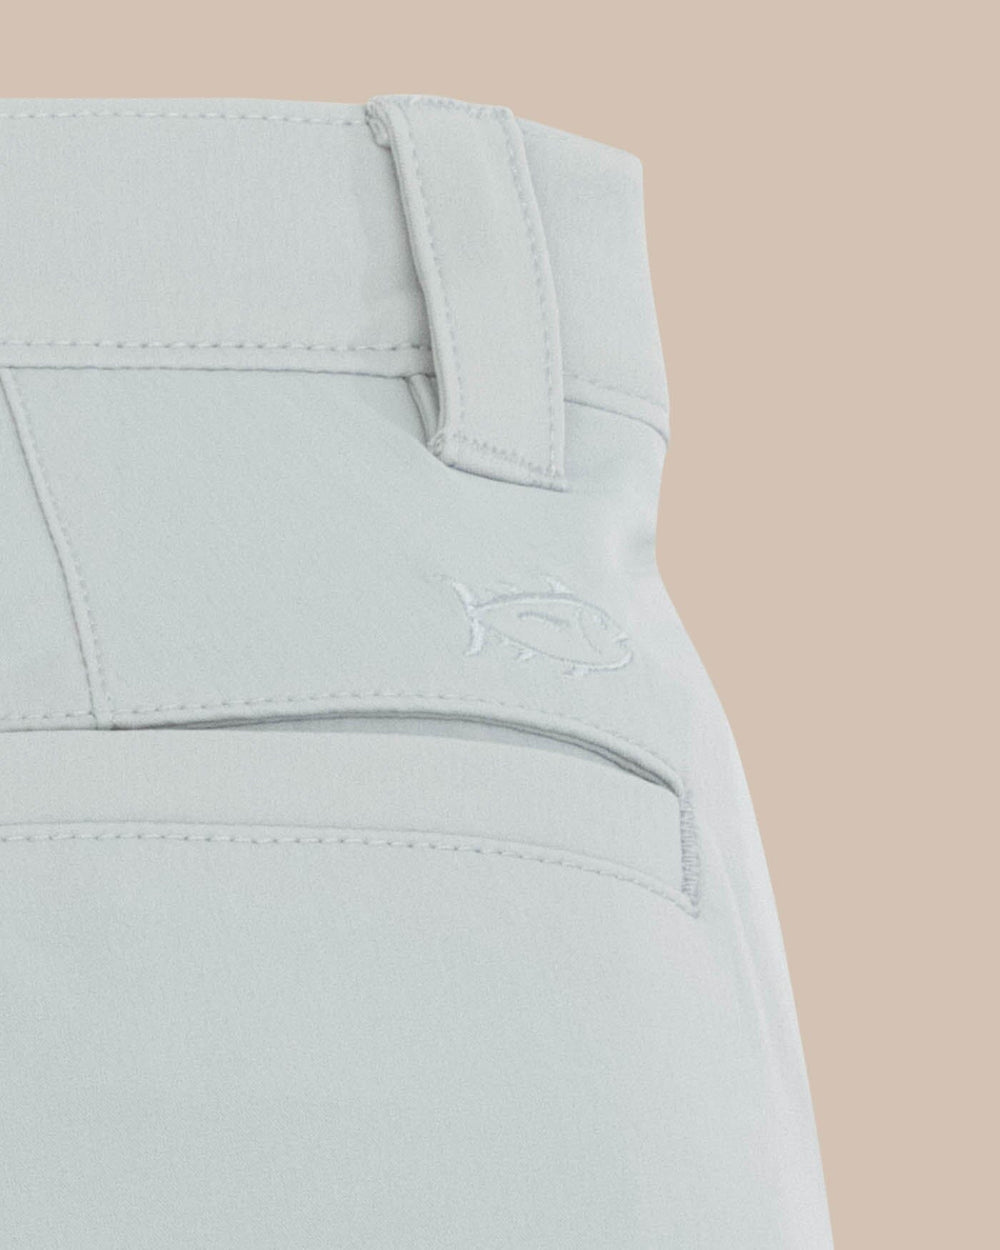 The detail view of the Southern Tide brrr die 10 Short by Southern Tide - Seagull Grey